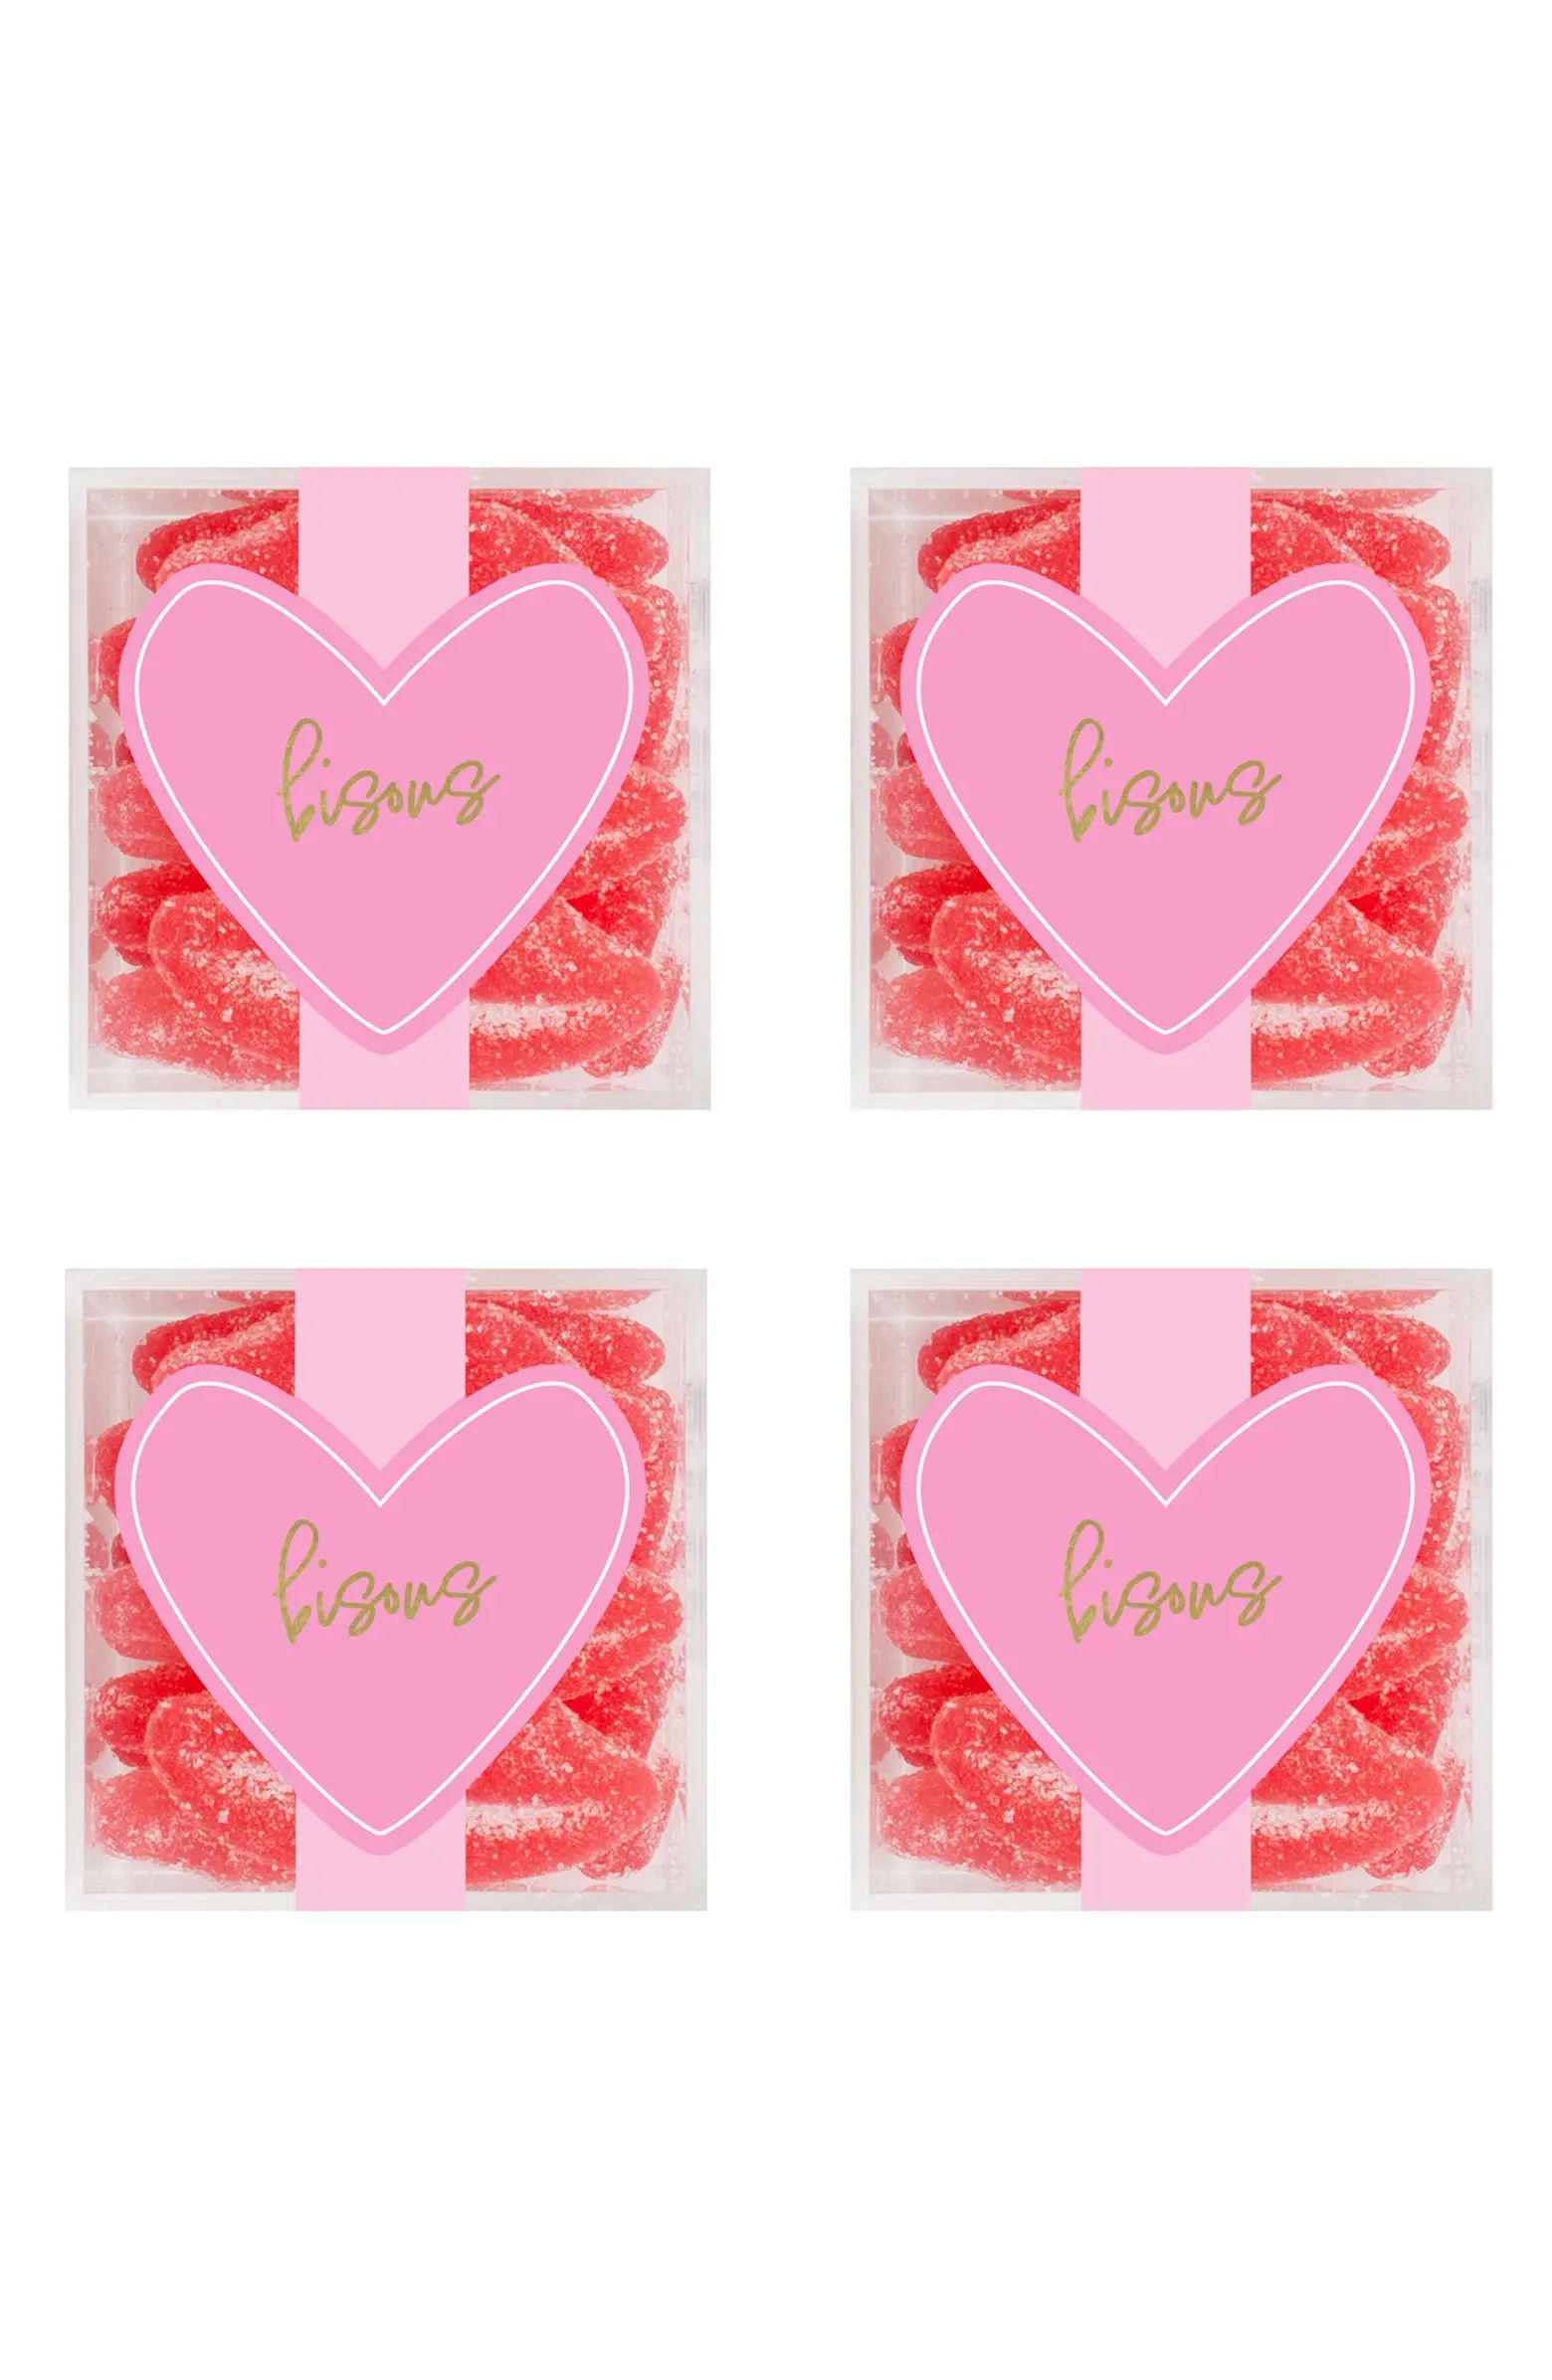 sugarfina Bisous Sugar Lips Set of 4 Small Candy Cubes | Nordstrom | Nordstrom